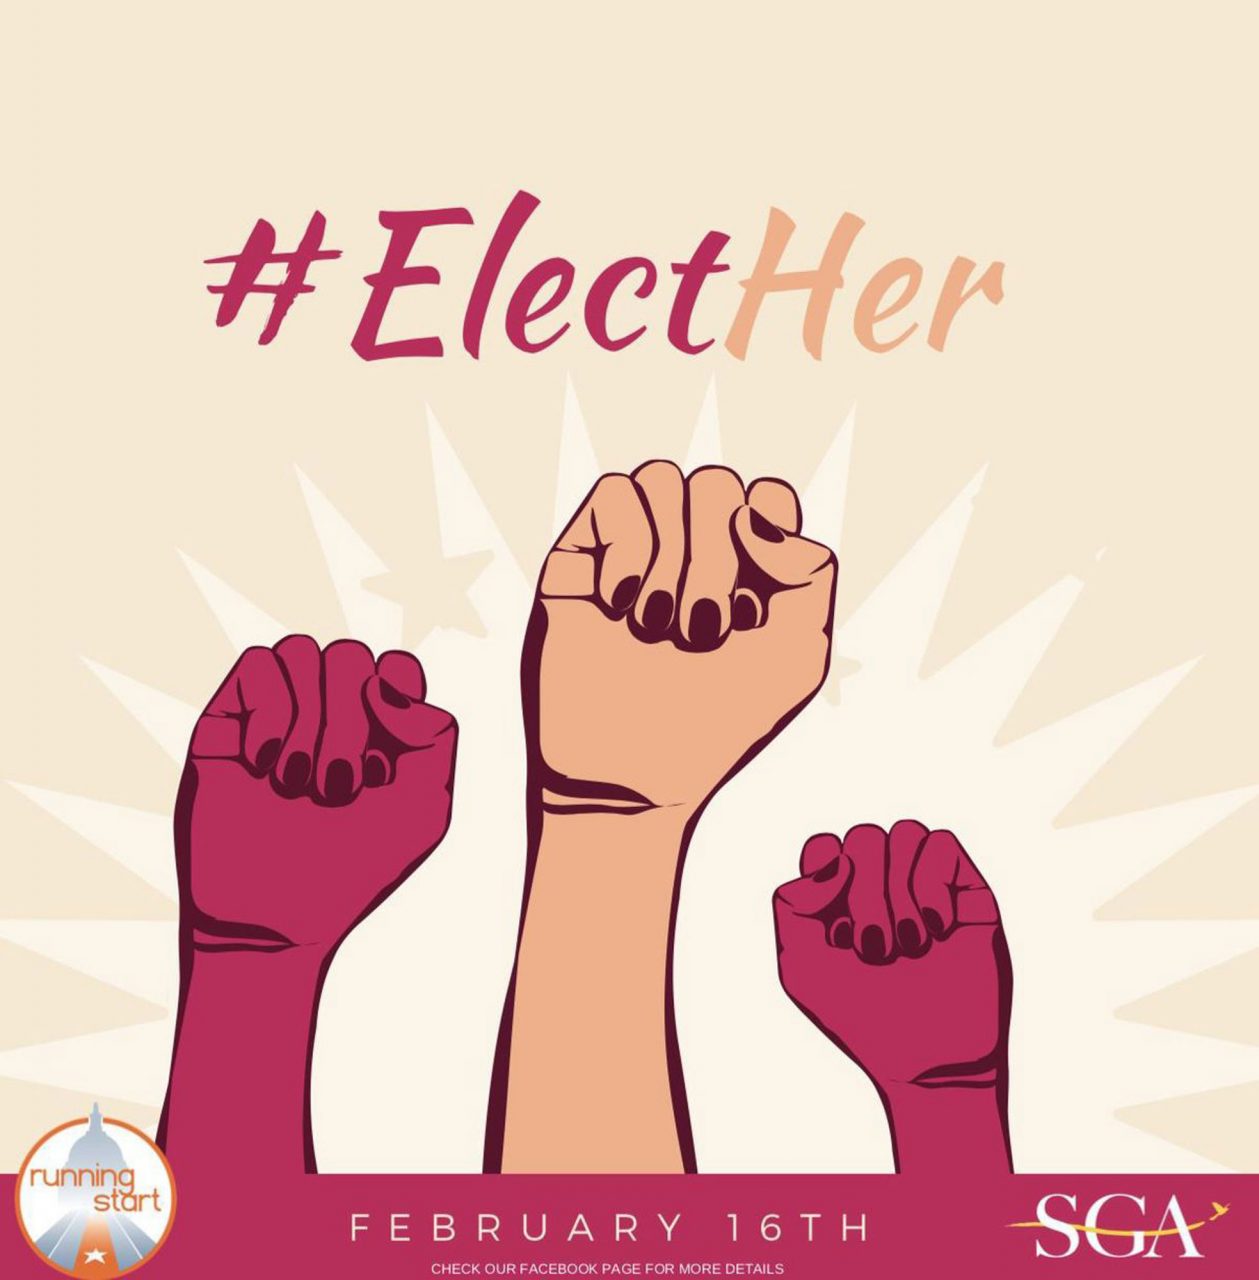 Elect Her is a program that trains college women to have more of a representation in leadership roles and to run for student government. The event is on Friday, February 16th and is hosted by SGA.